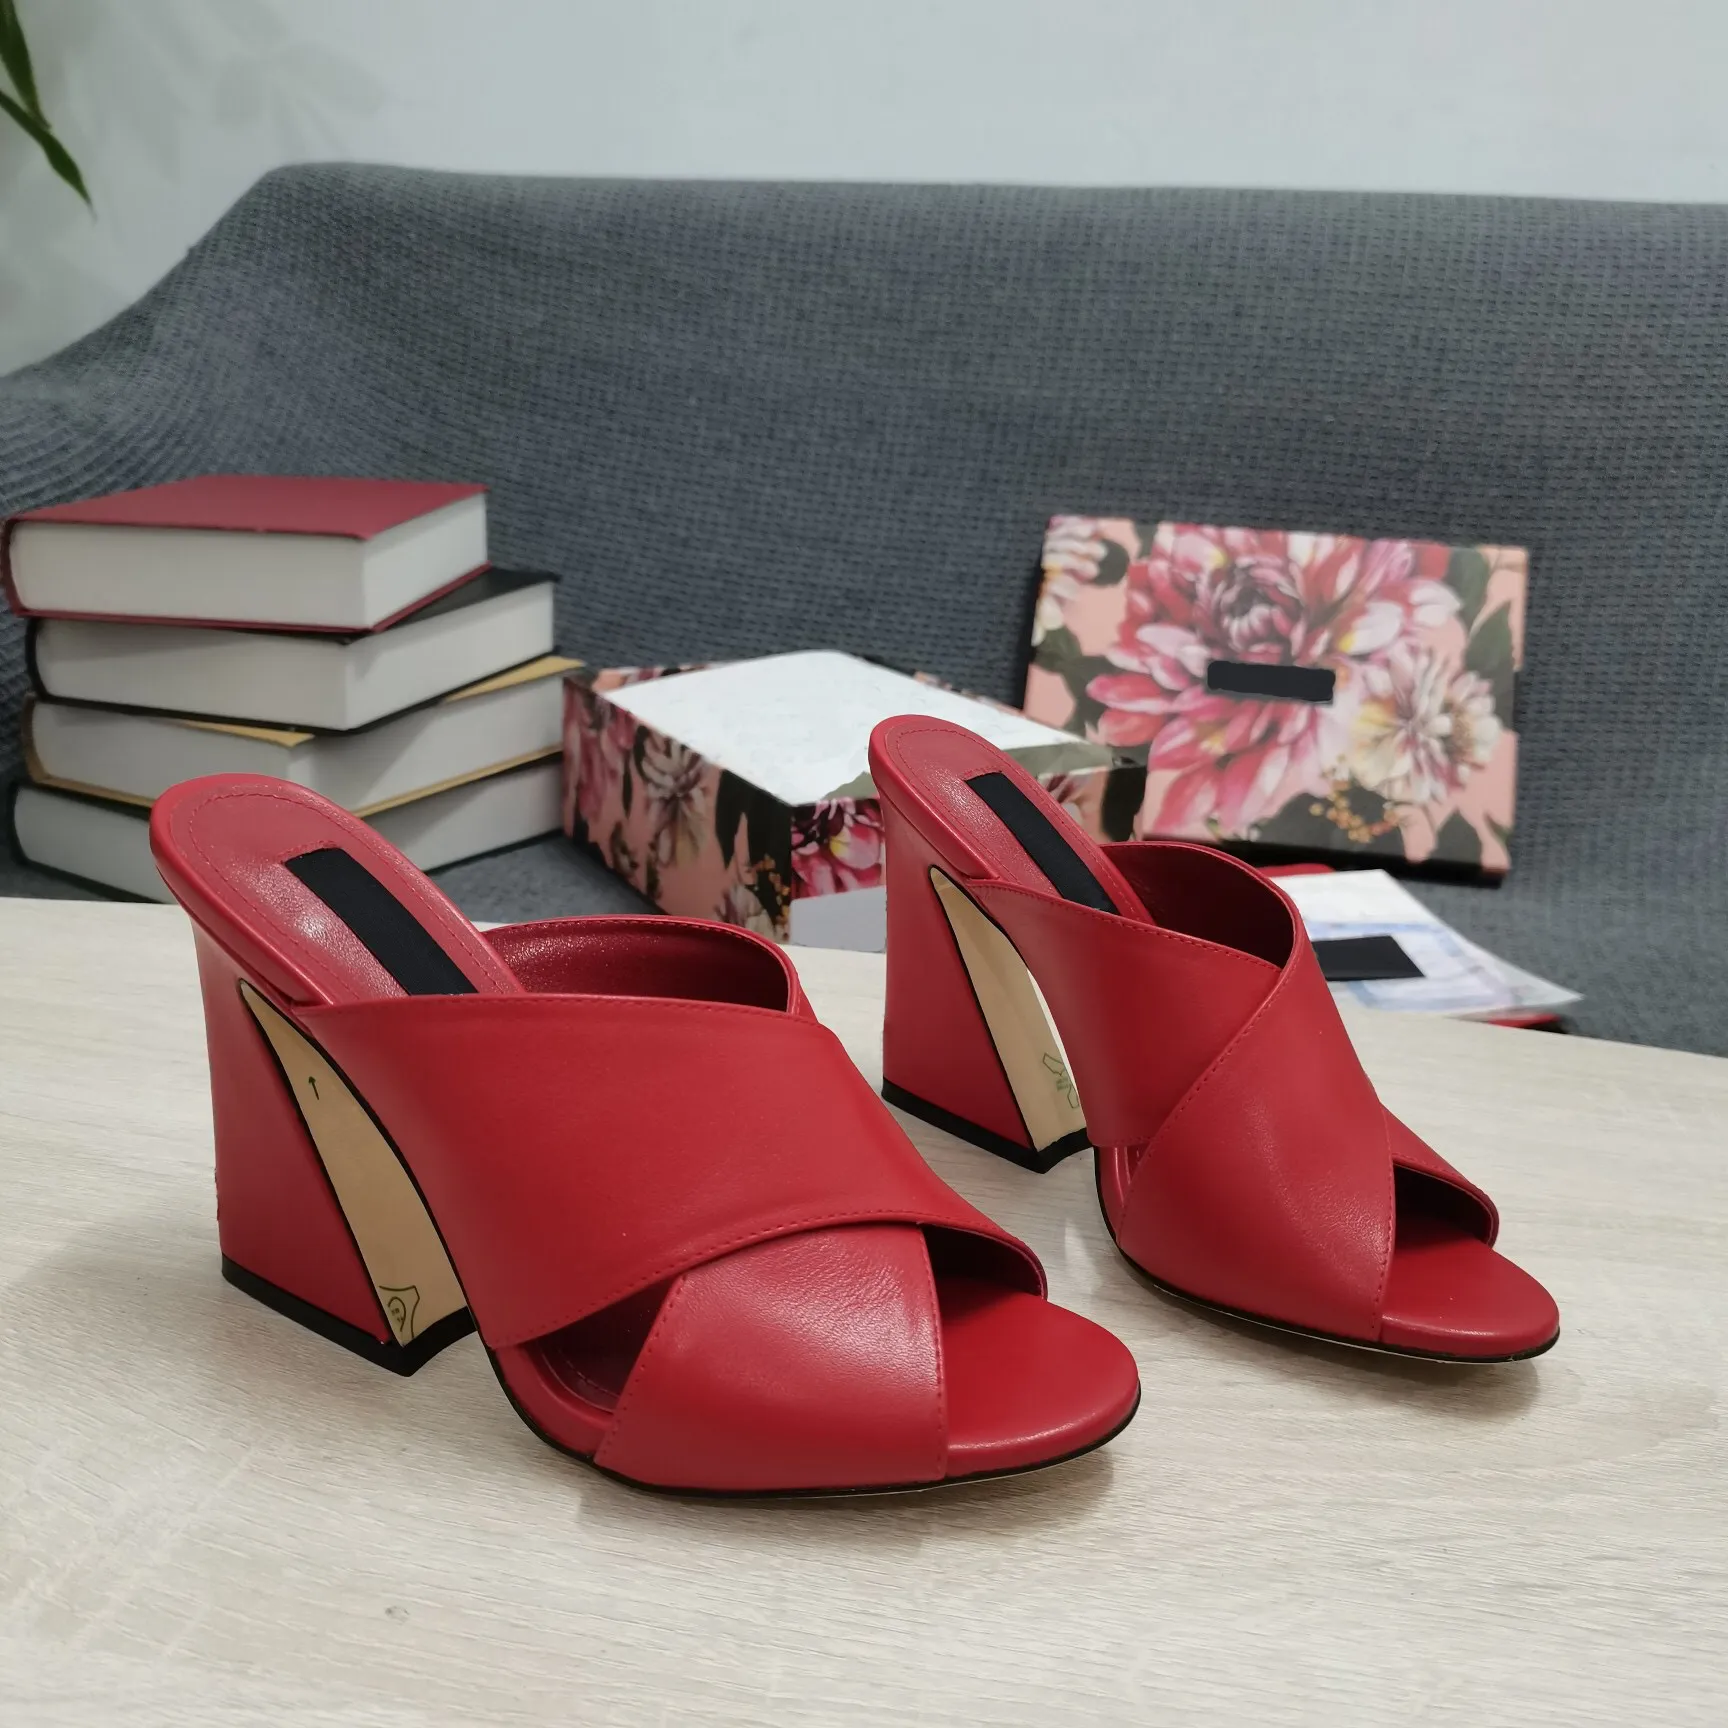 10A Highest quality calfskin high heeled Sandals Designer with box luxury slippers fashion single light colors summer slipper large size 35-43 DG07